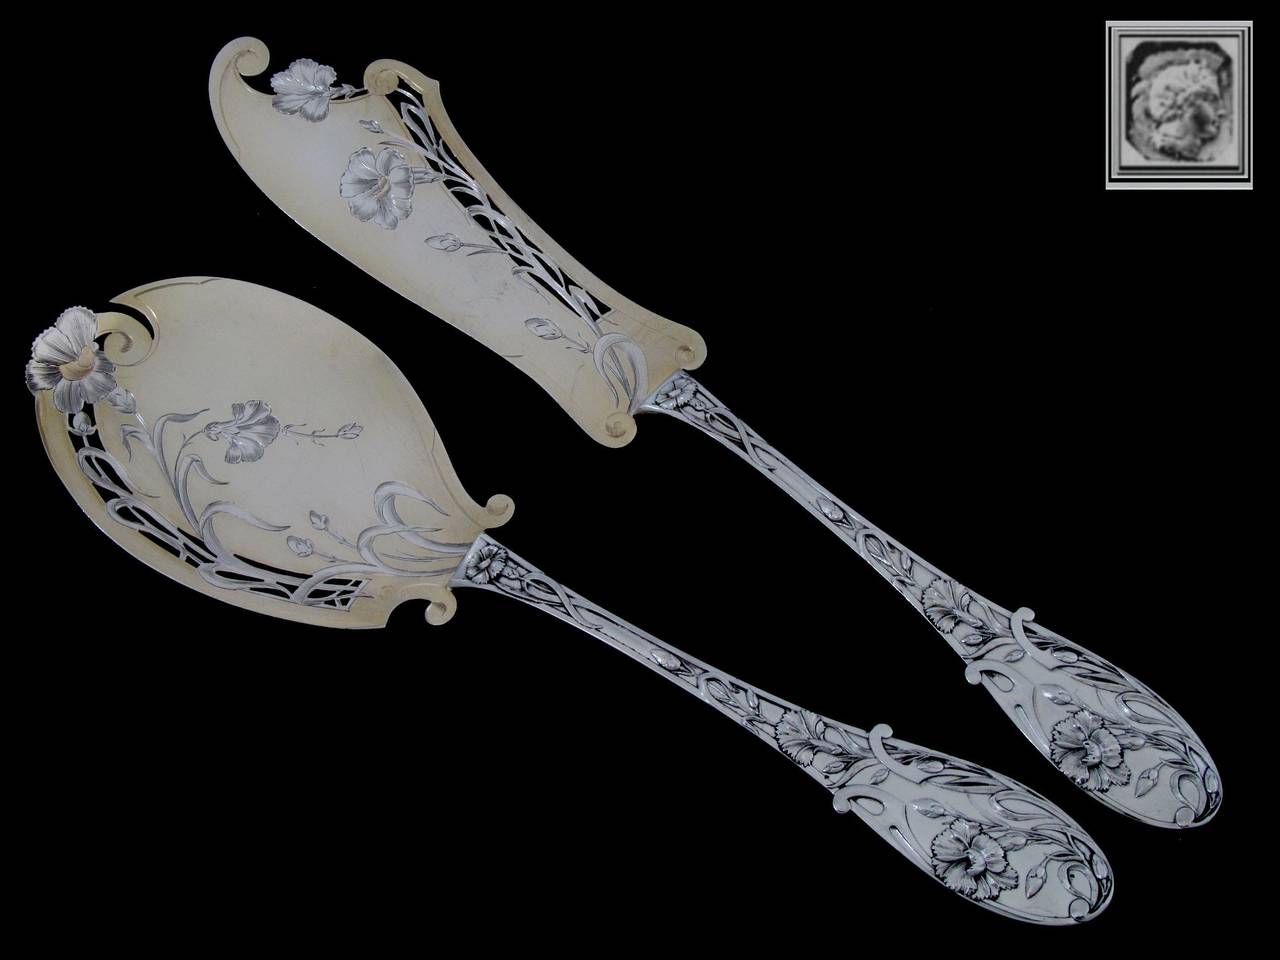 A very rare French Sterling Silver Vermeil Ice Cream set 2 pc of truly exceptional quality, for the richness of the decoration, the form and sculpting. 

The silver and silver-gilt pierced upper parts are engraved with flowers and foliage. The